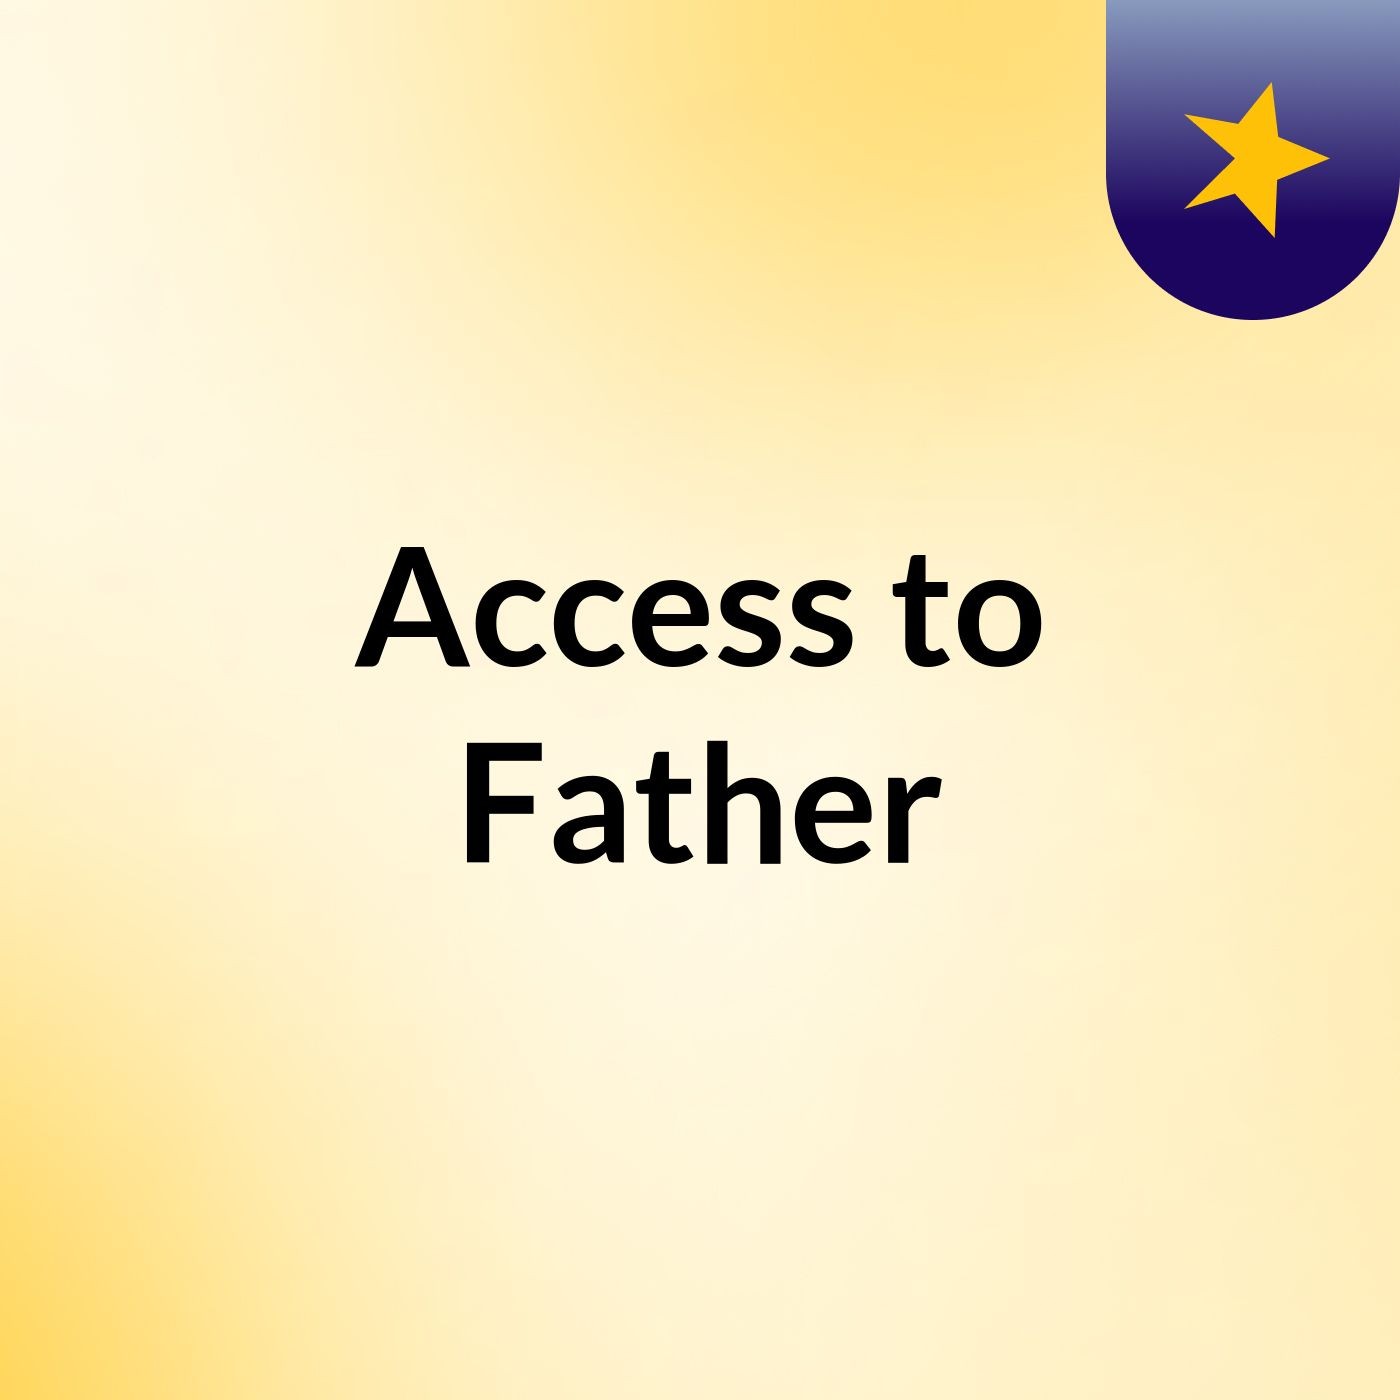 Access to Father